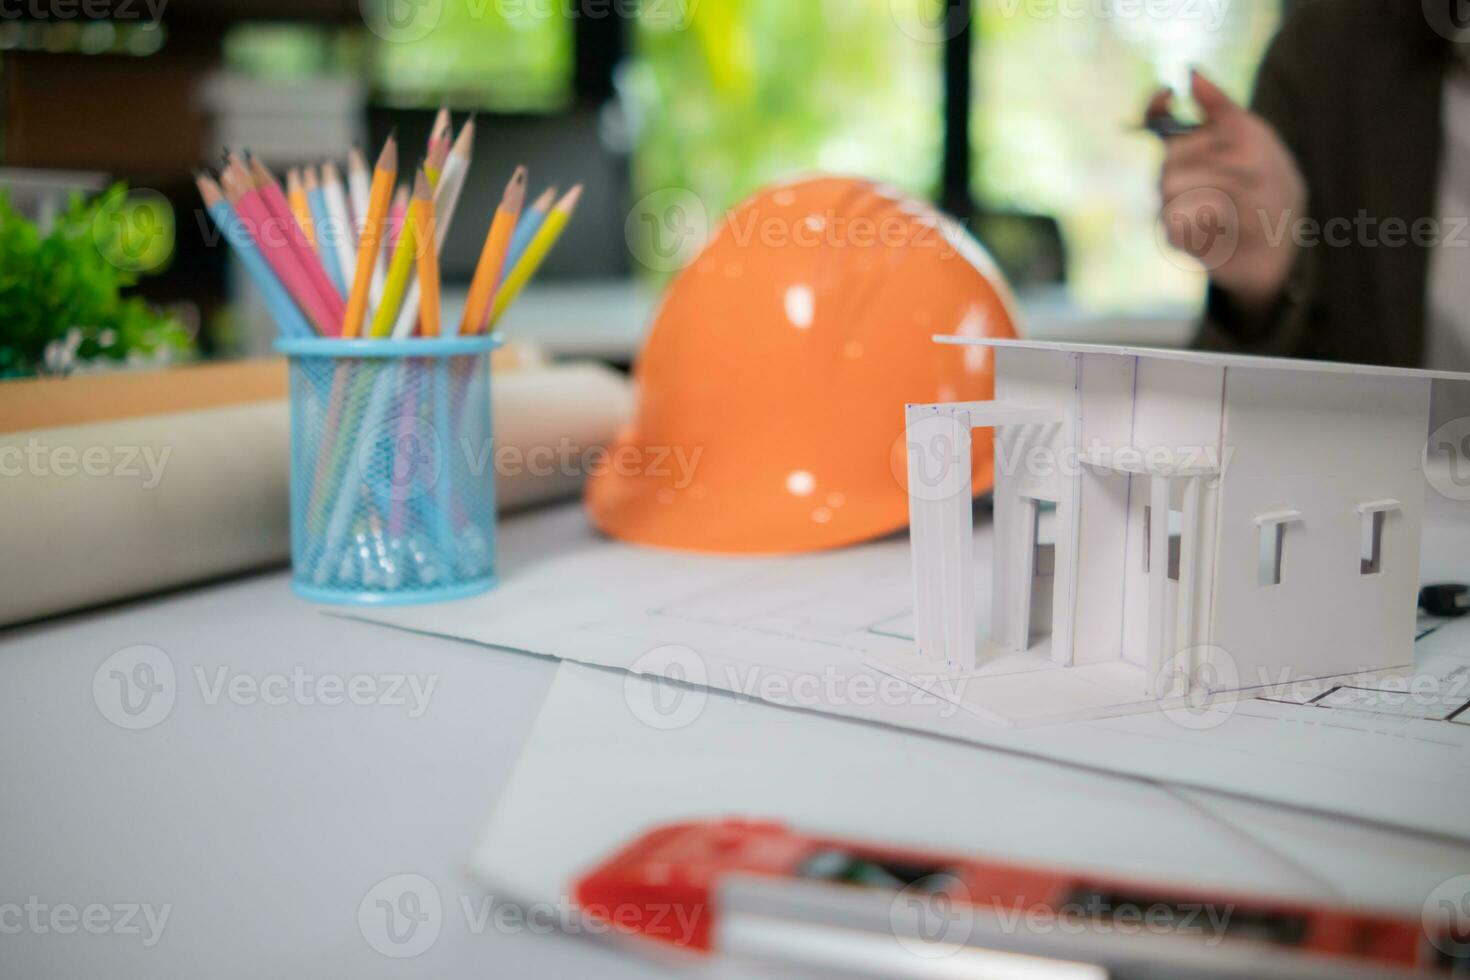 Equipment and drawings lying on desks inside the offices of architects and engineers. background of an architect's workbench getting ready for work to achieve the desired outcome of the client. photo